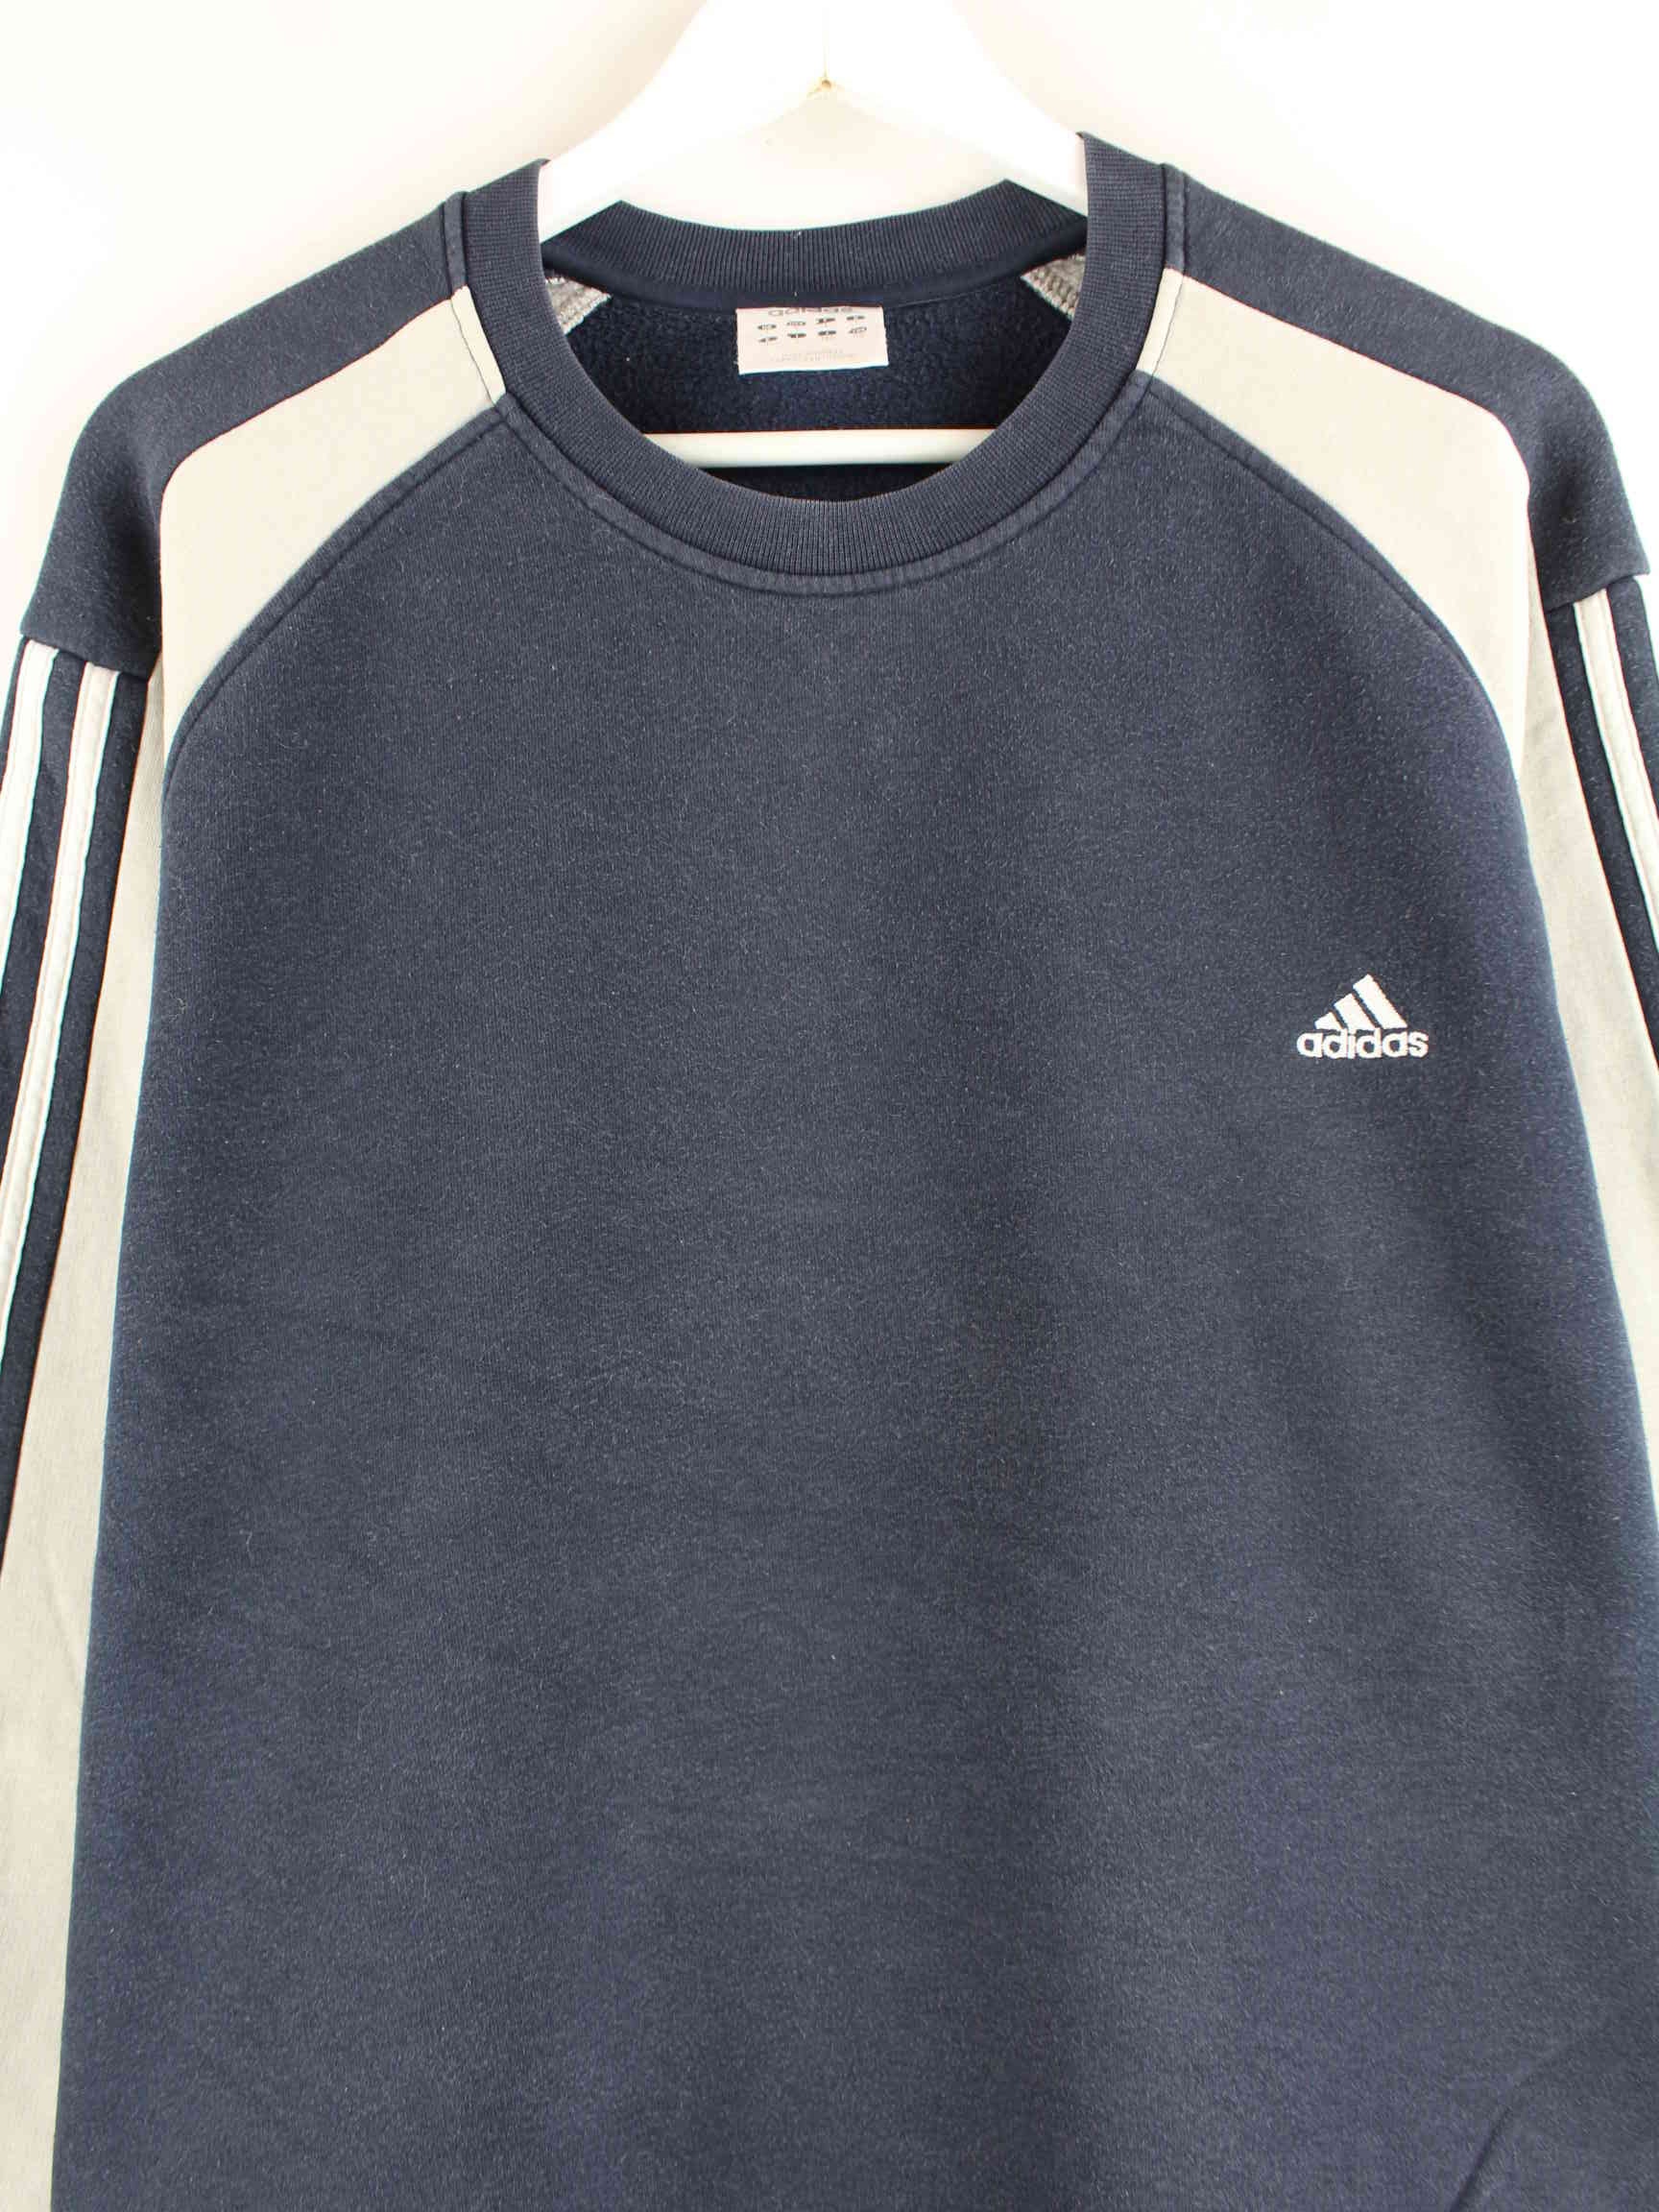 Adidas y2k Embroidered 3-Stripes Sweater Blau L (detail image 1)